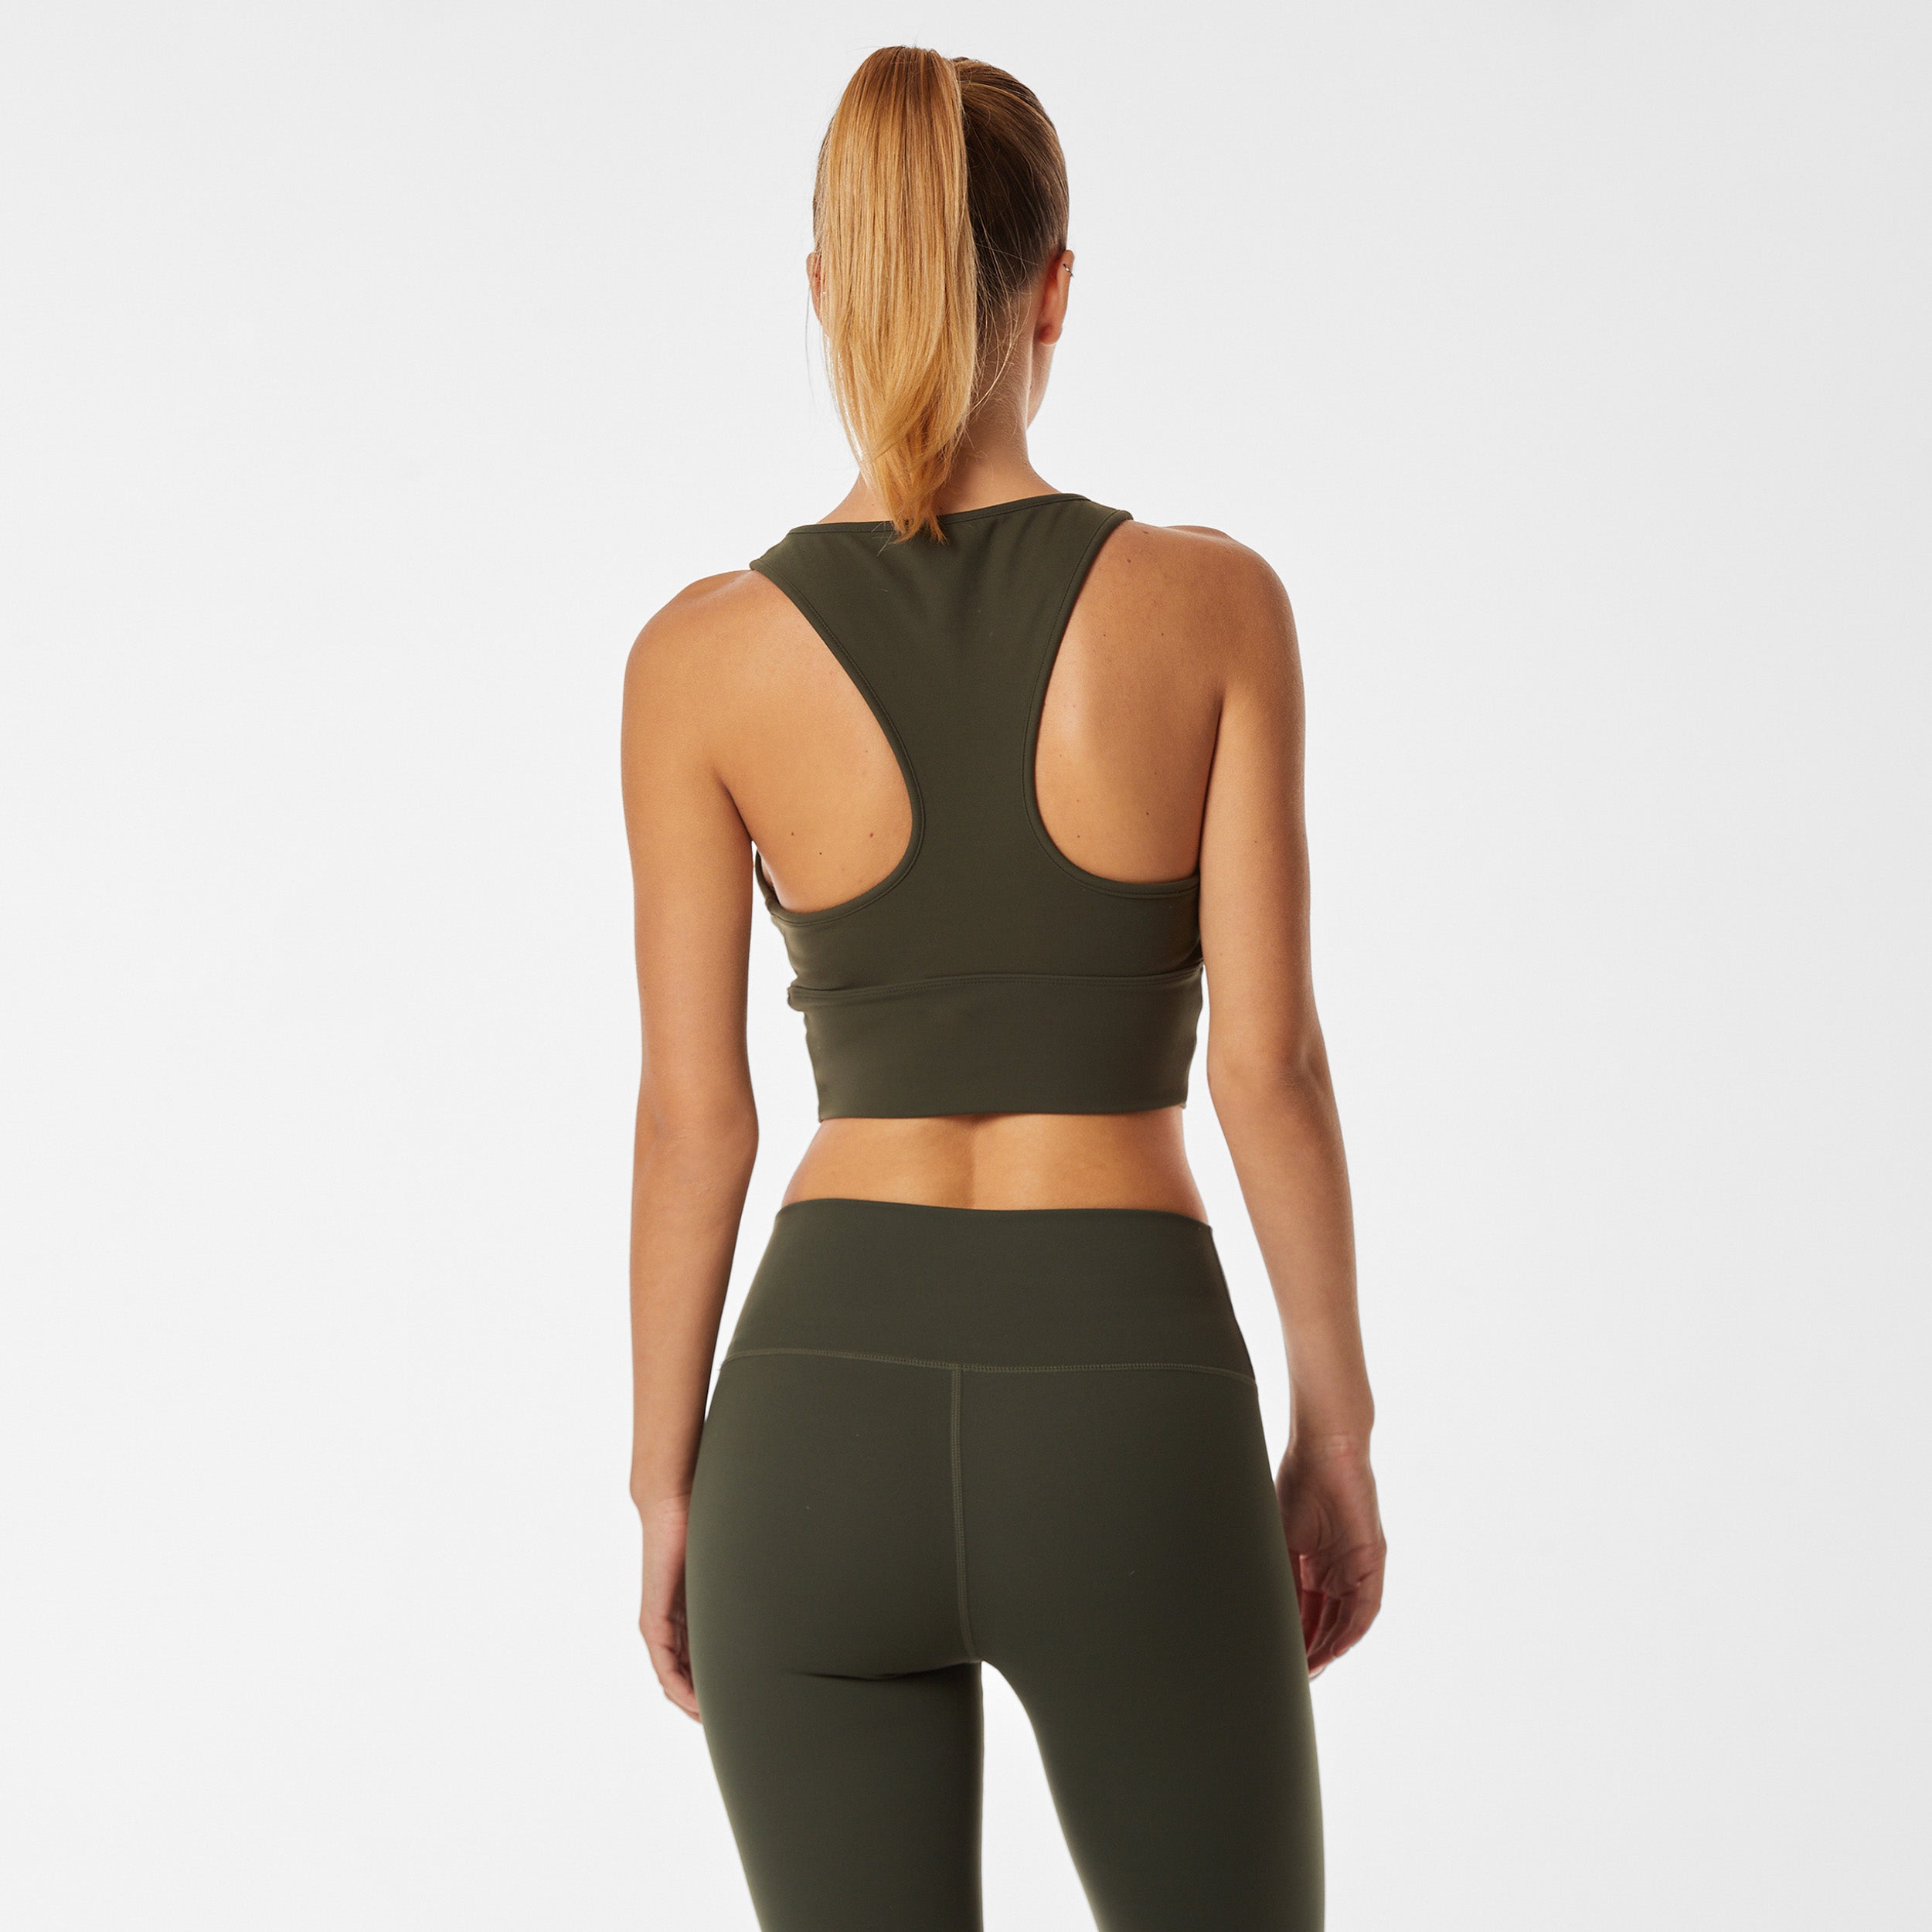 Rear view of woman wearing ruched front green racerback bra and matching legging